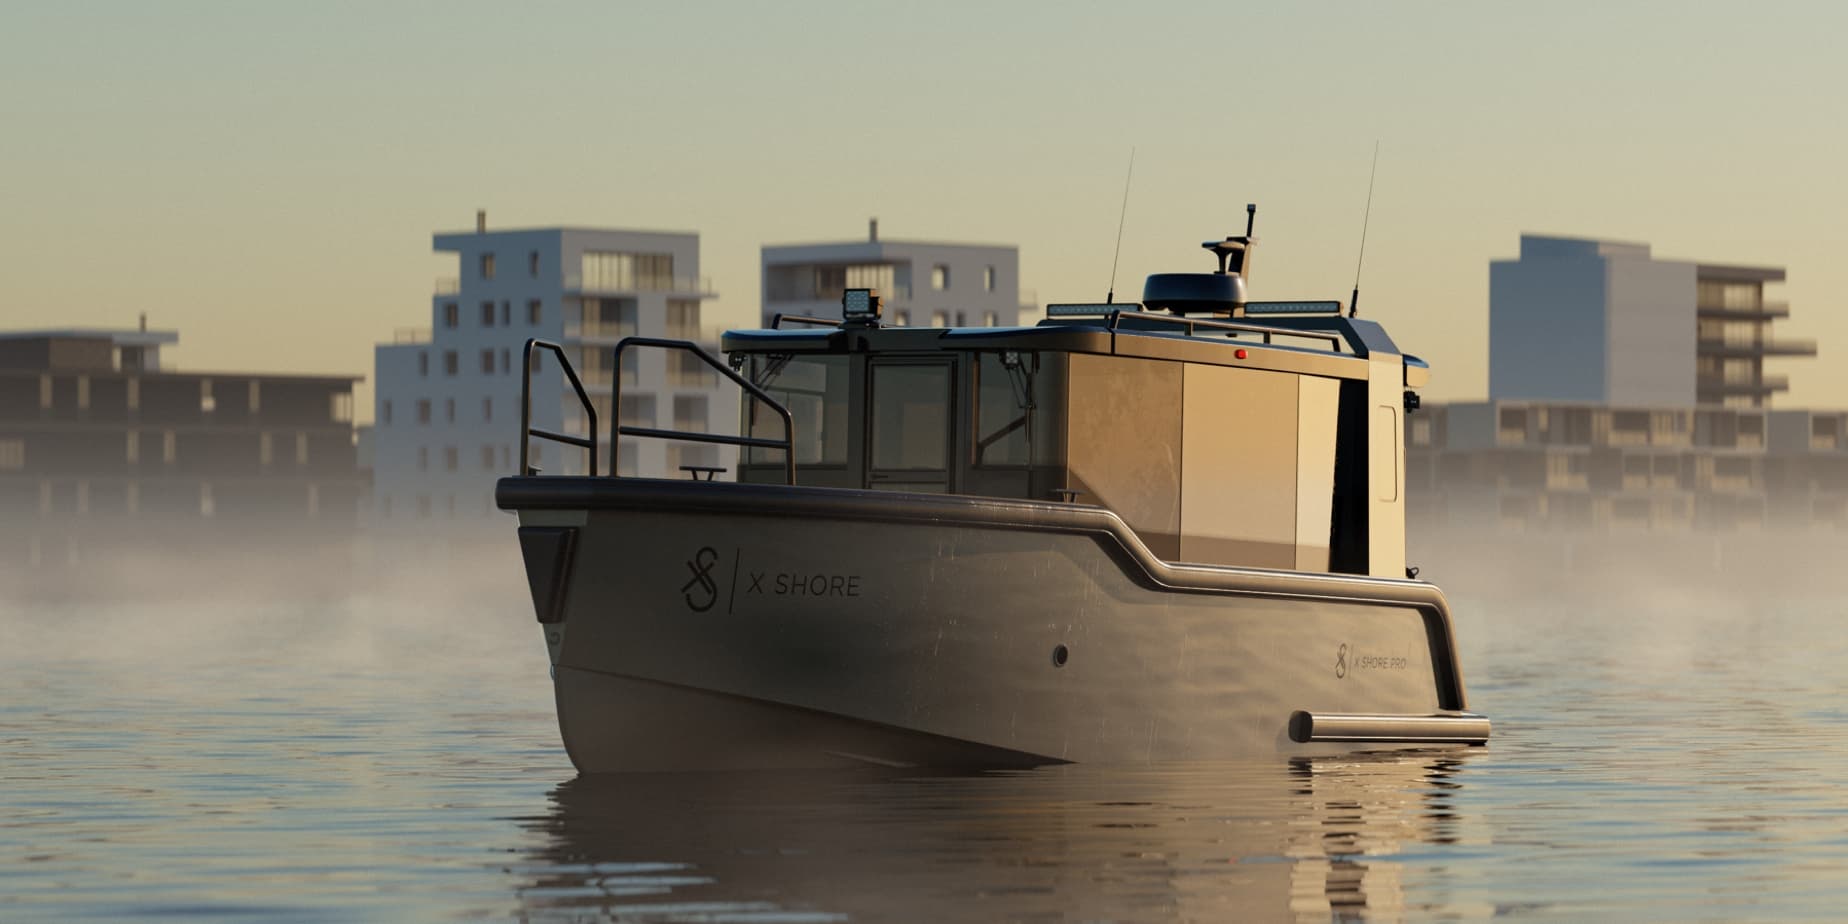 Swedish-Made X Shore 1 Electric Boat Hits the Market, Is Stylish